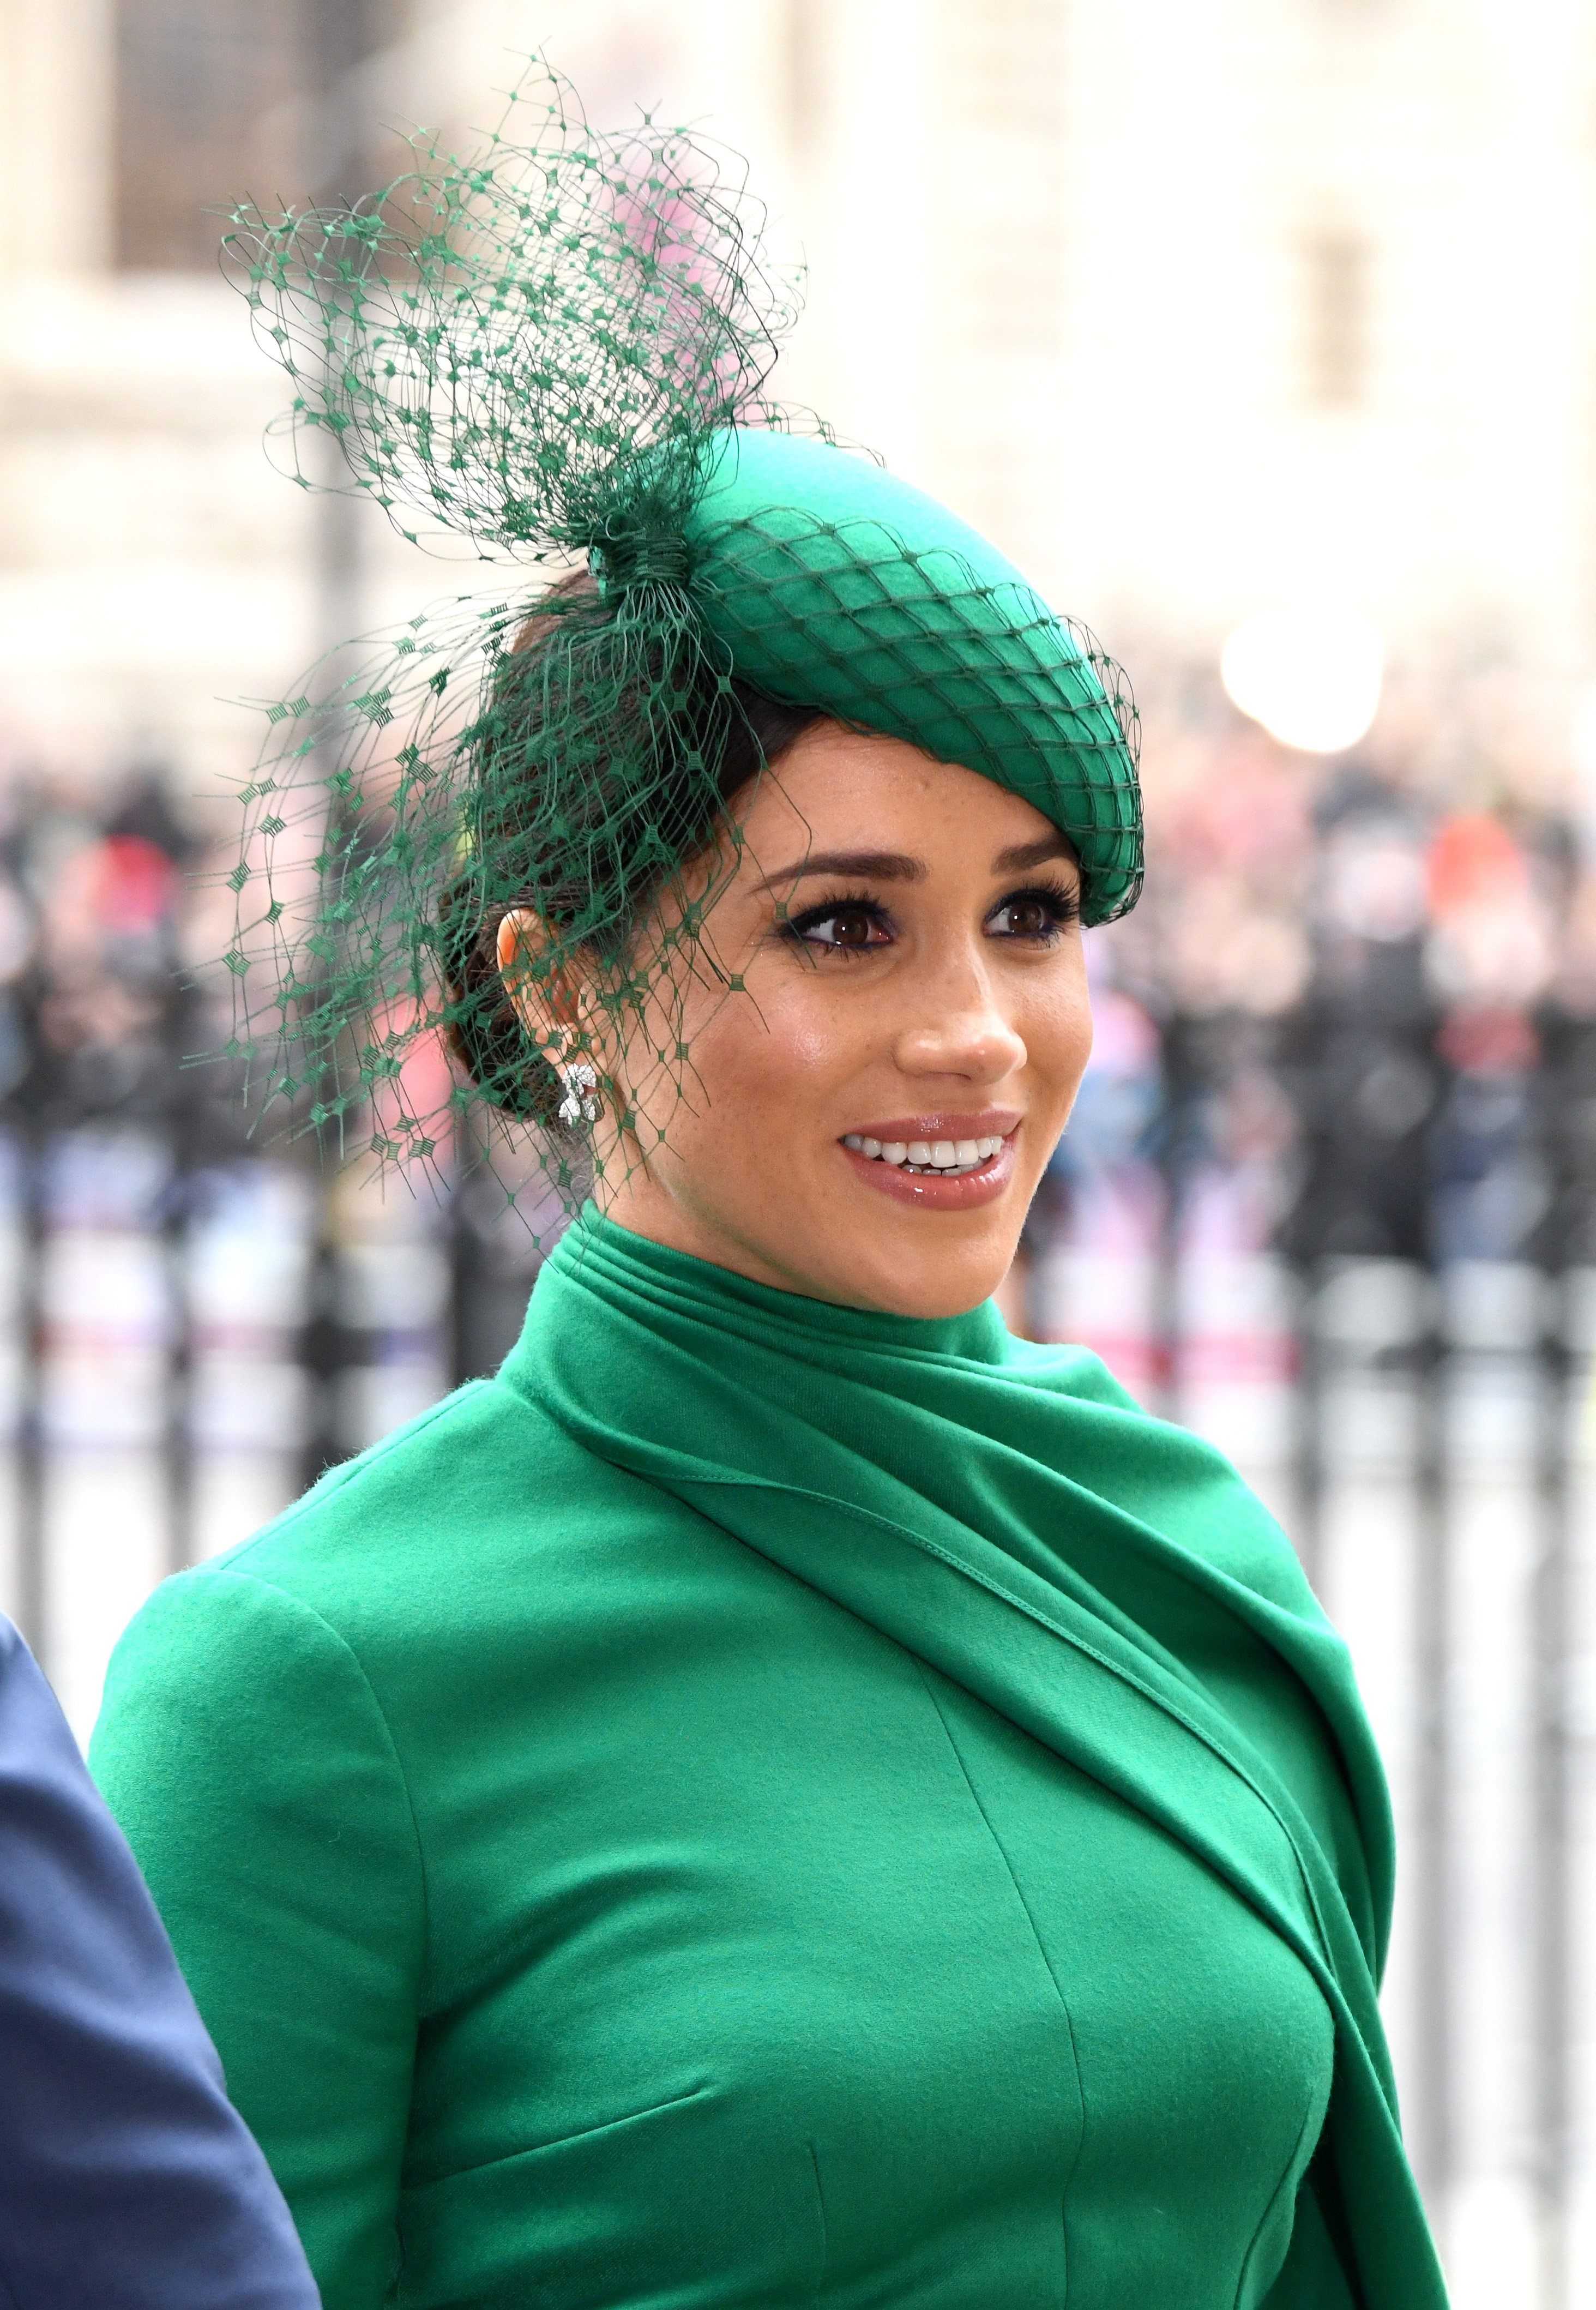 Meghan, Duchess of Sussex at the Commonwealth Day Service 2020 at Westminster Abbey on March 09, 2020 in London, England. | Source: Getty Images